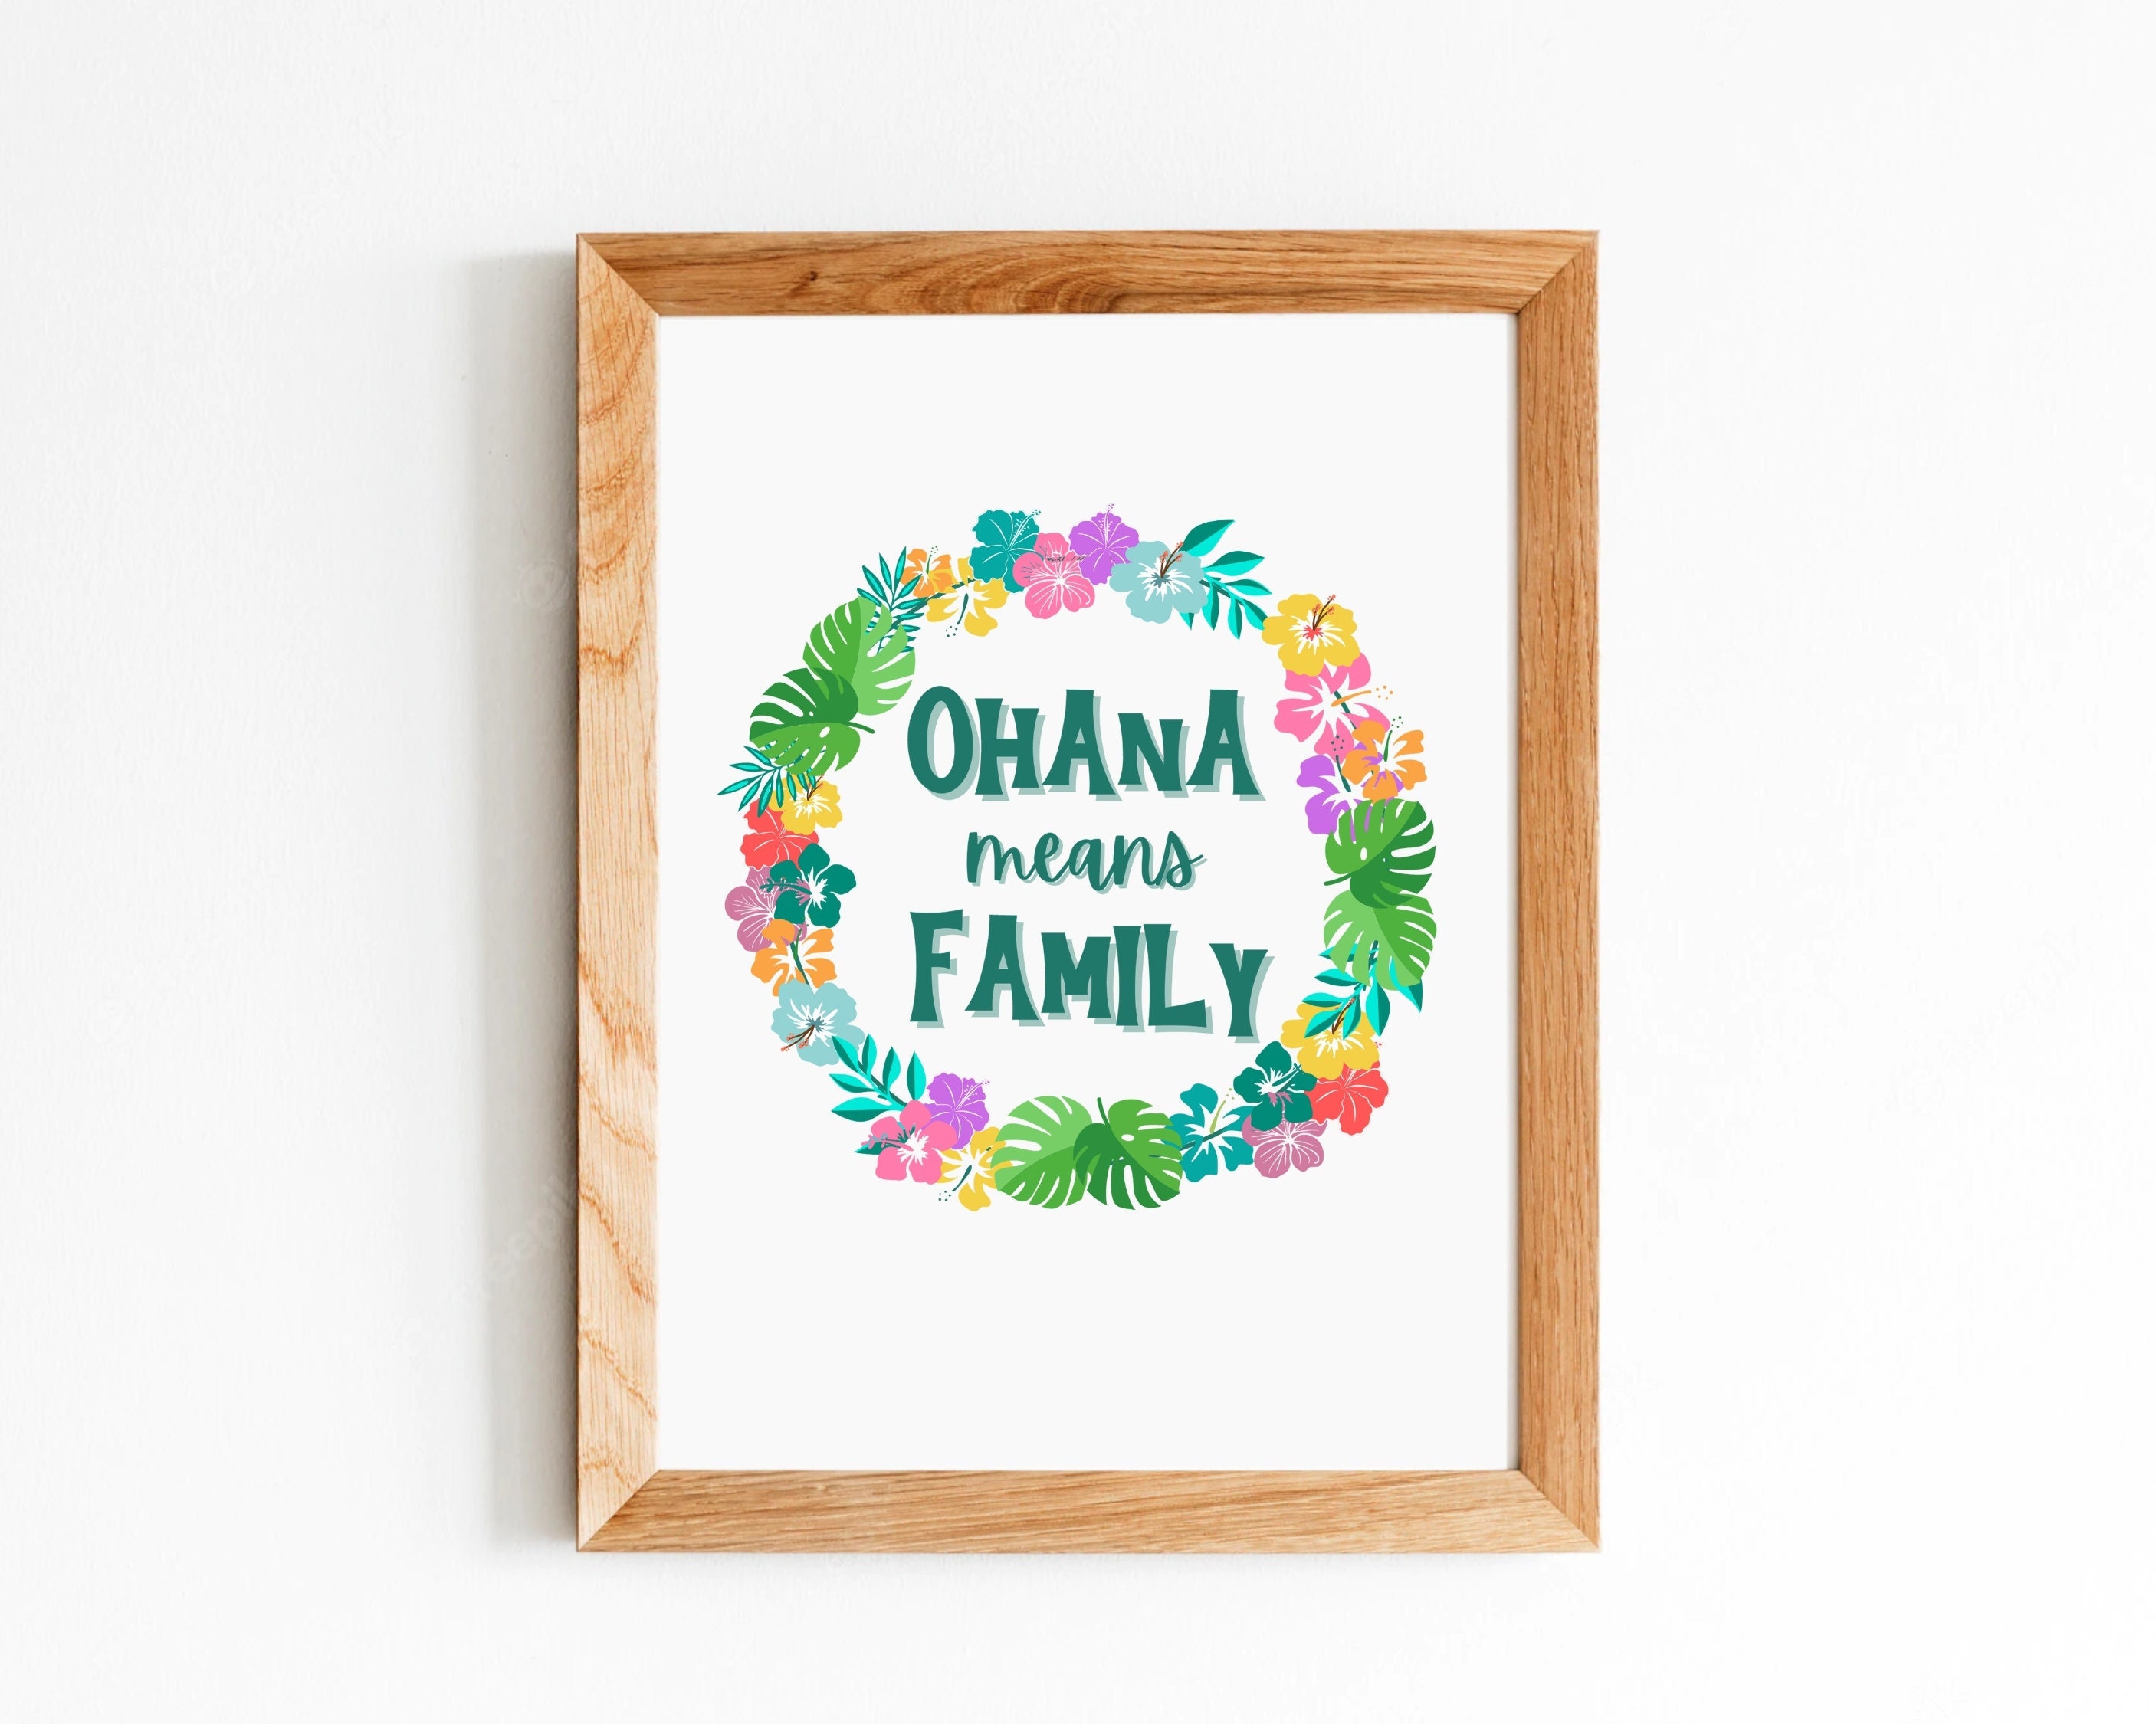 Ohana Means Family - Inspired by Lilo and Stitch - Poster Print Photo –  Simply Remarkable